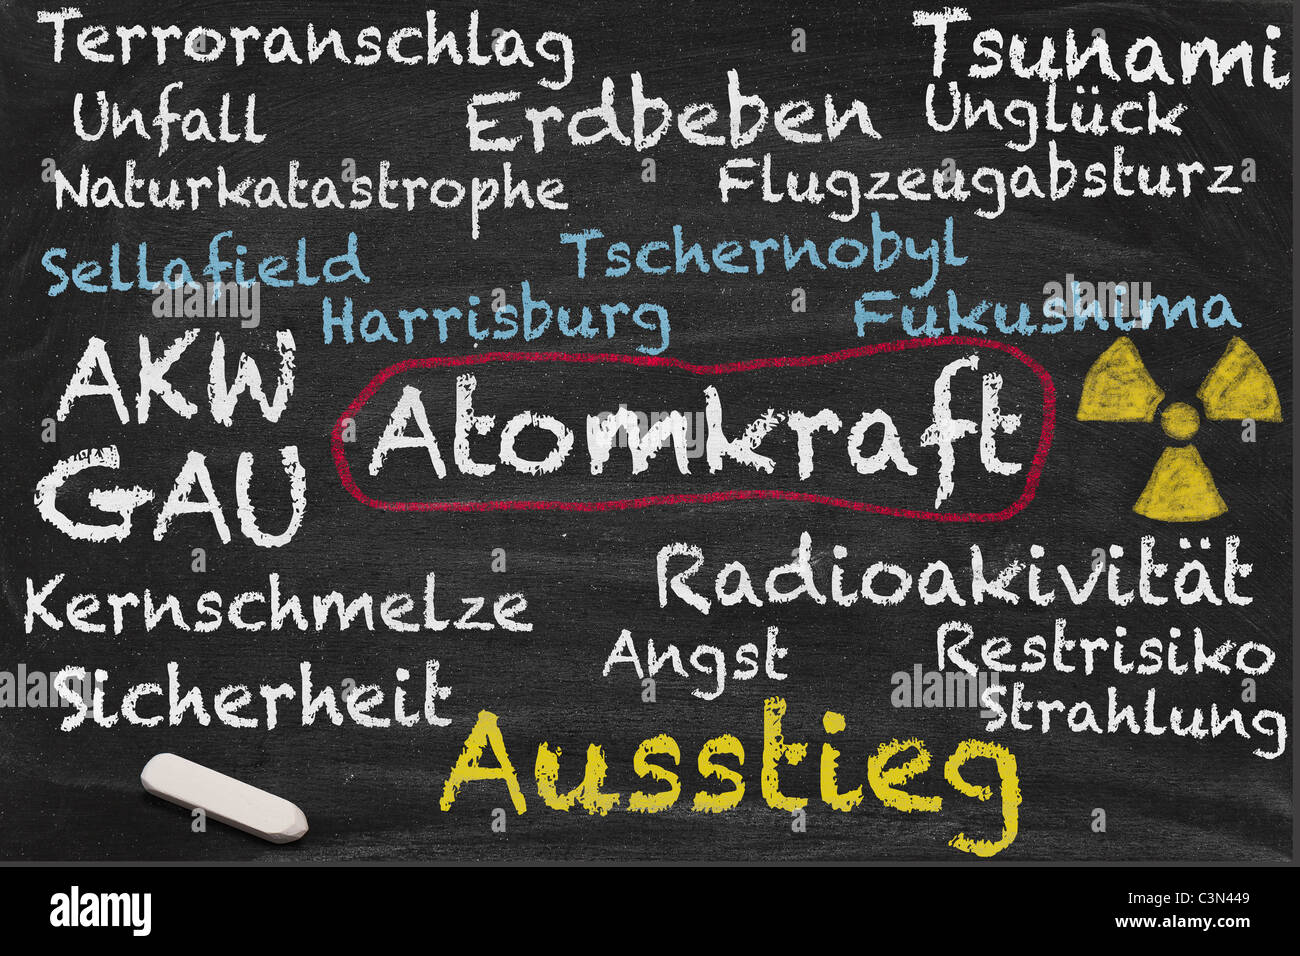 High resolution image with some German chalk lettering around nuclear power. Conceptual image for Nuclear phaseout themes. Stock Photo